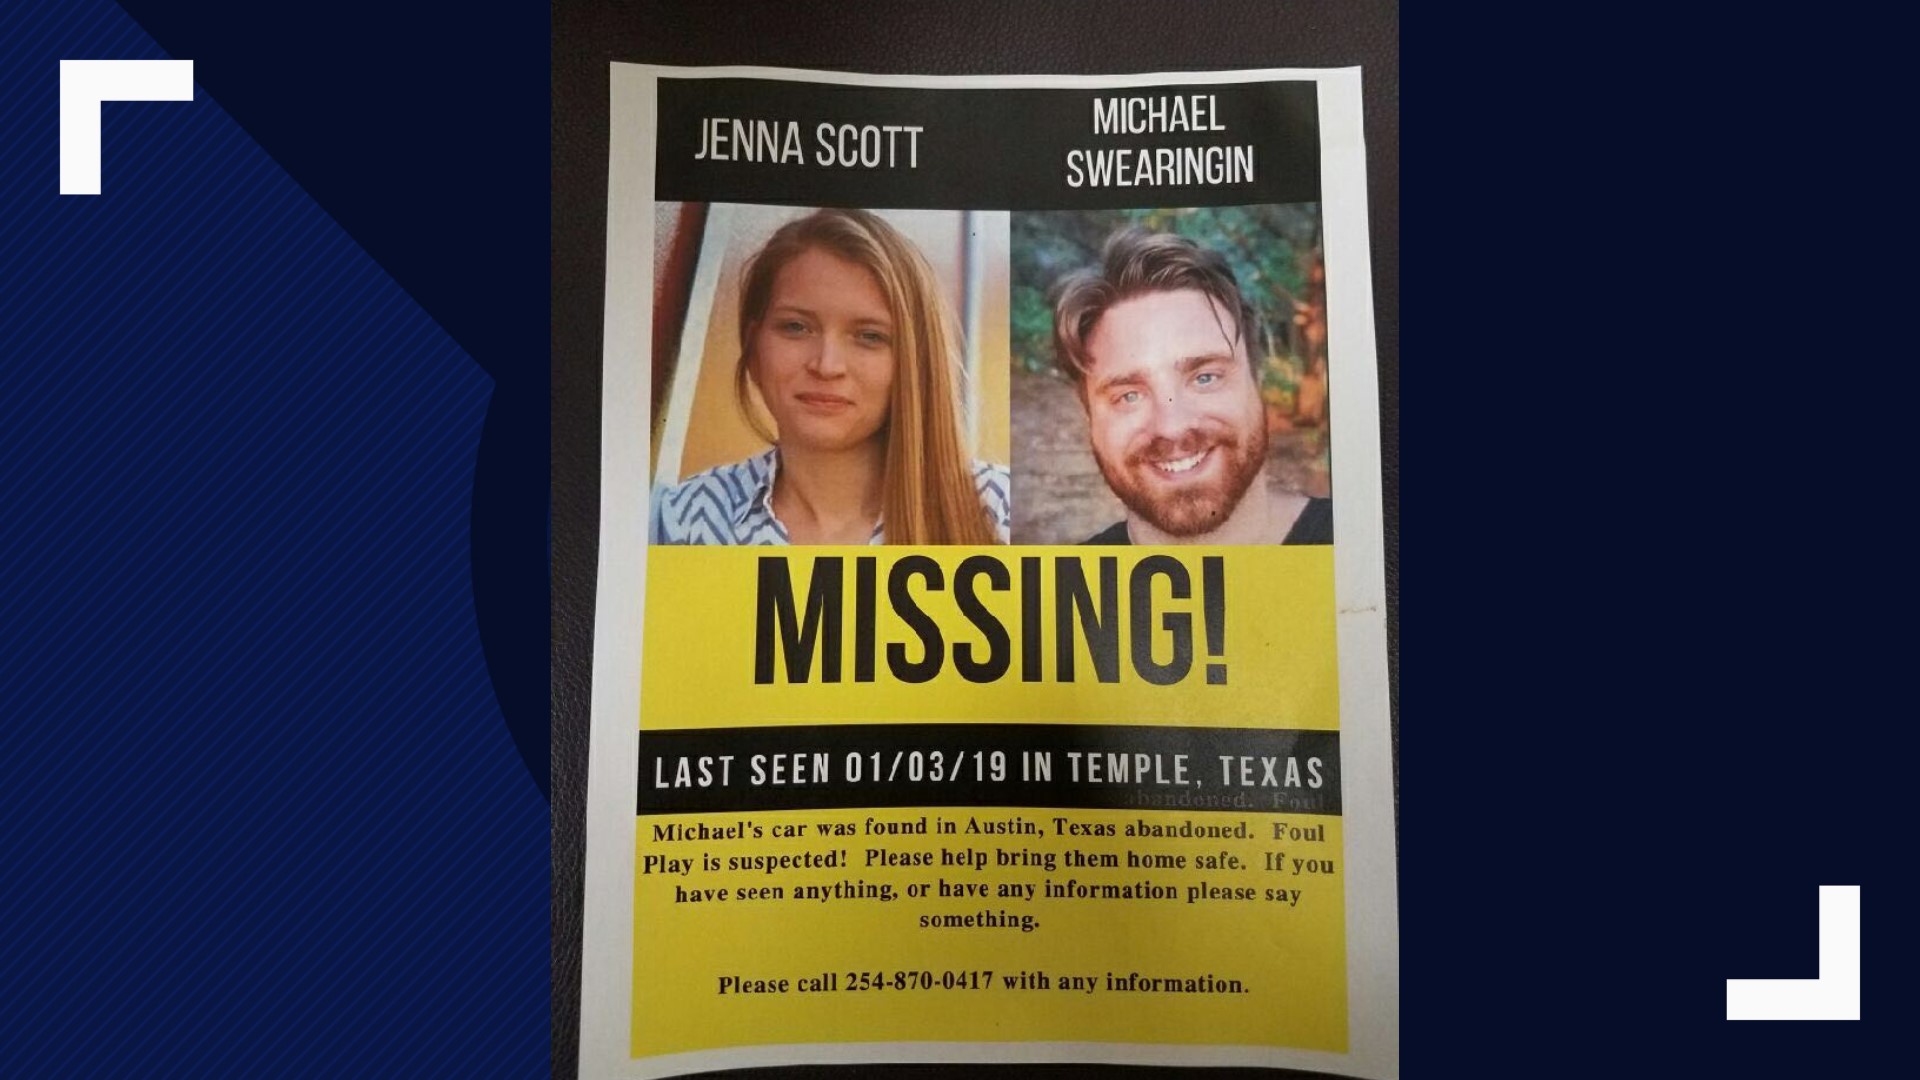 The parents of Jenna Scott and Michael Swearingin are hoping for a "miracle" to bring their children home.